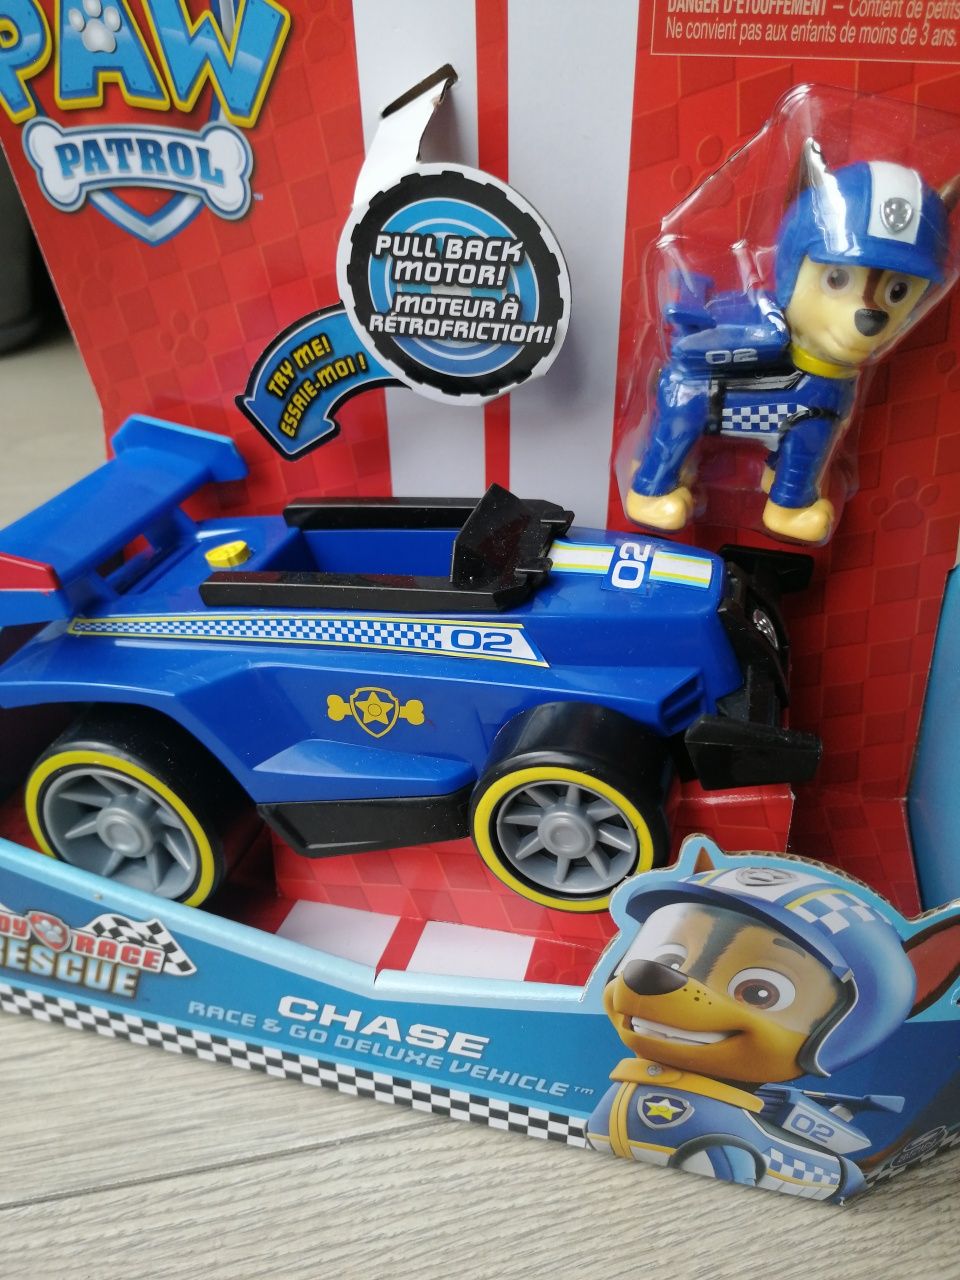 Psi patrol CHASE race and go deluxe vehicle